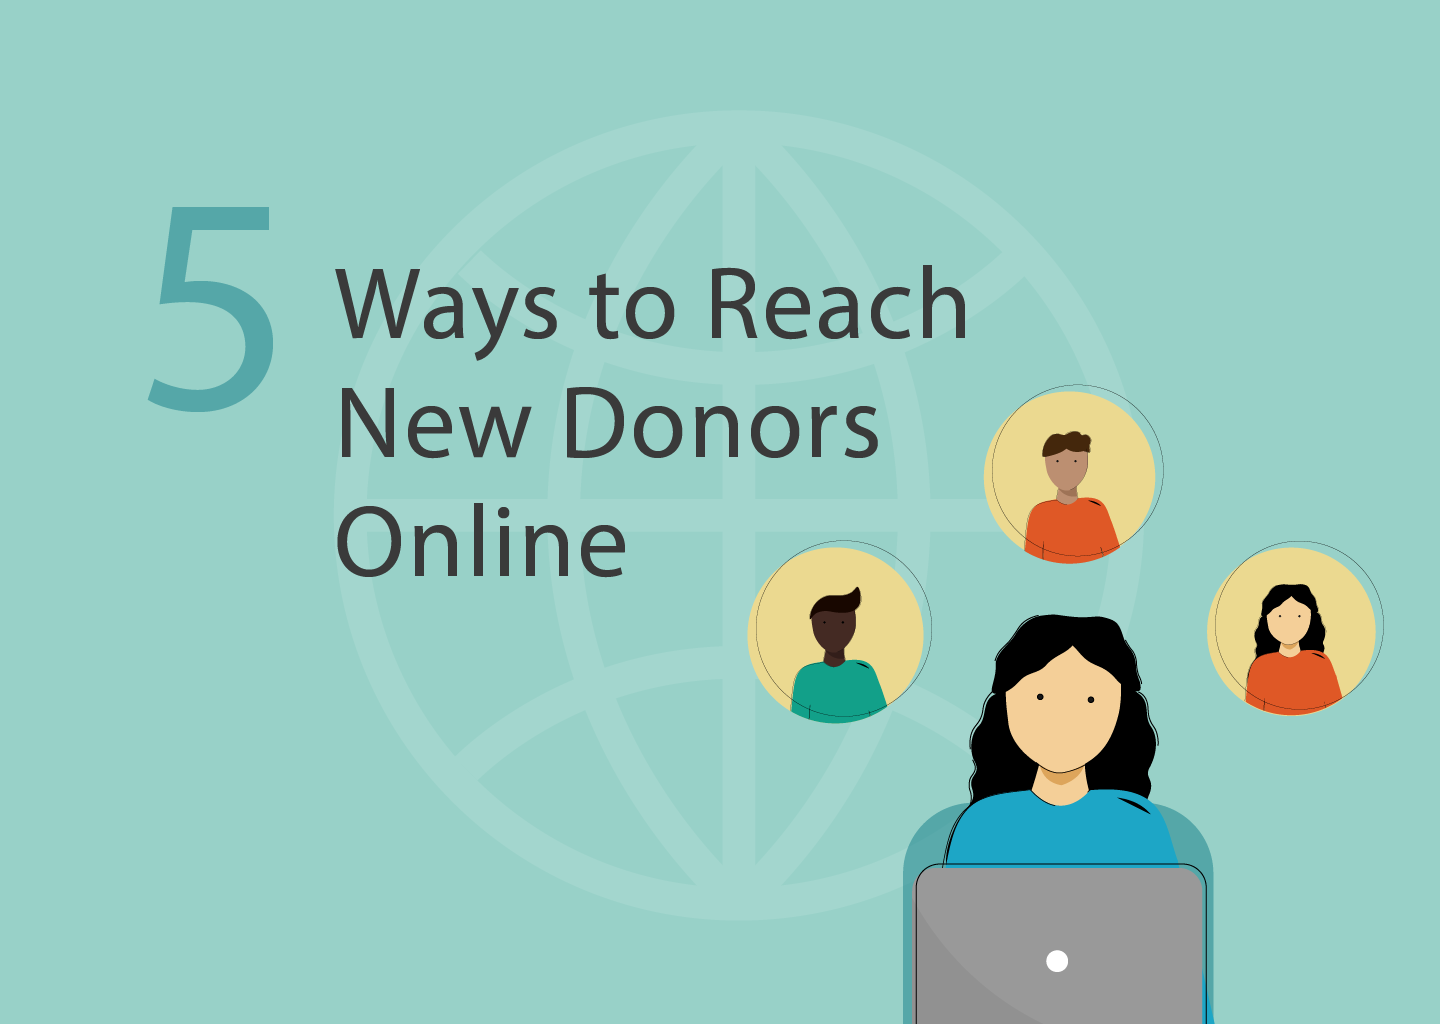 5 Ways to Reach New Donors Online